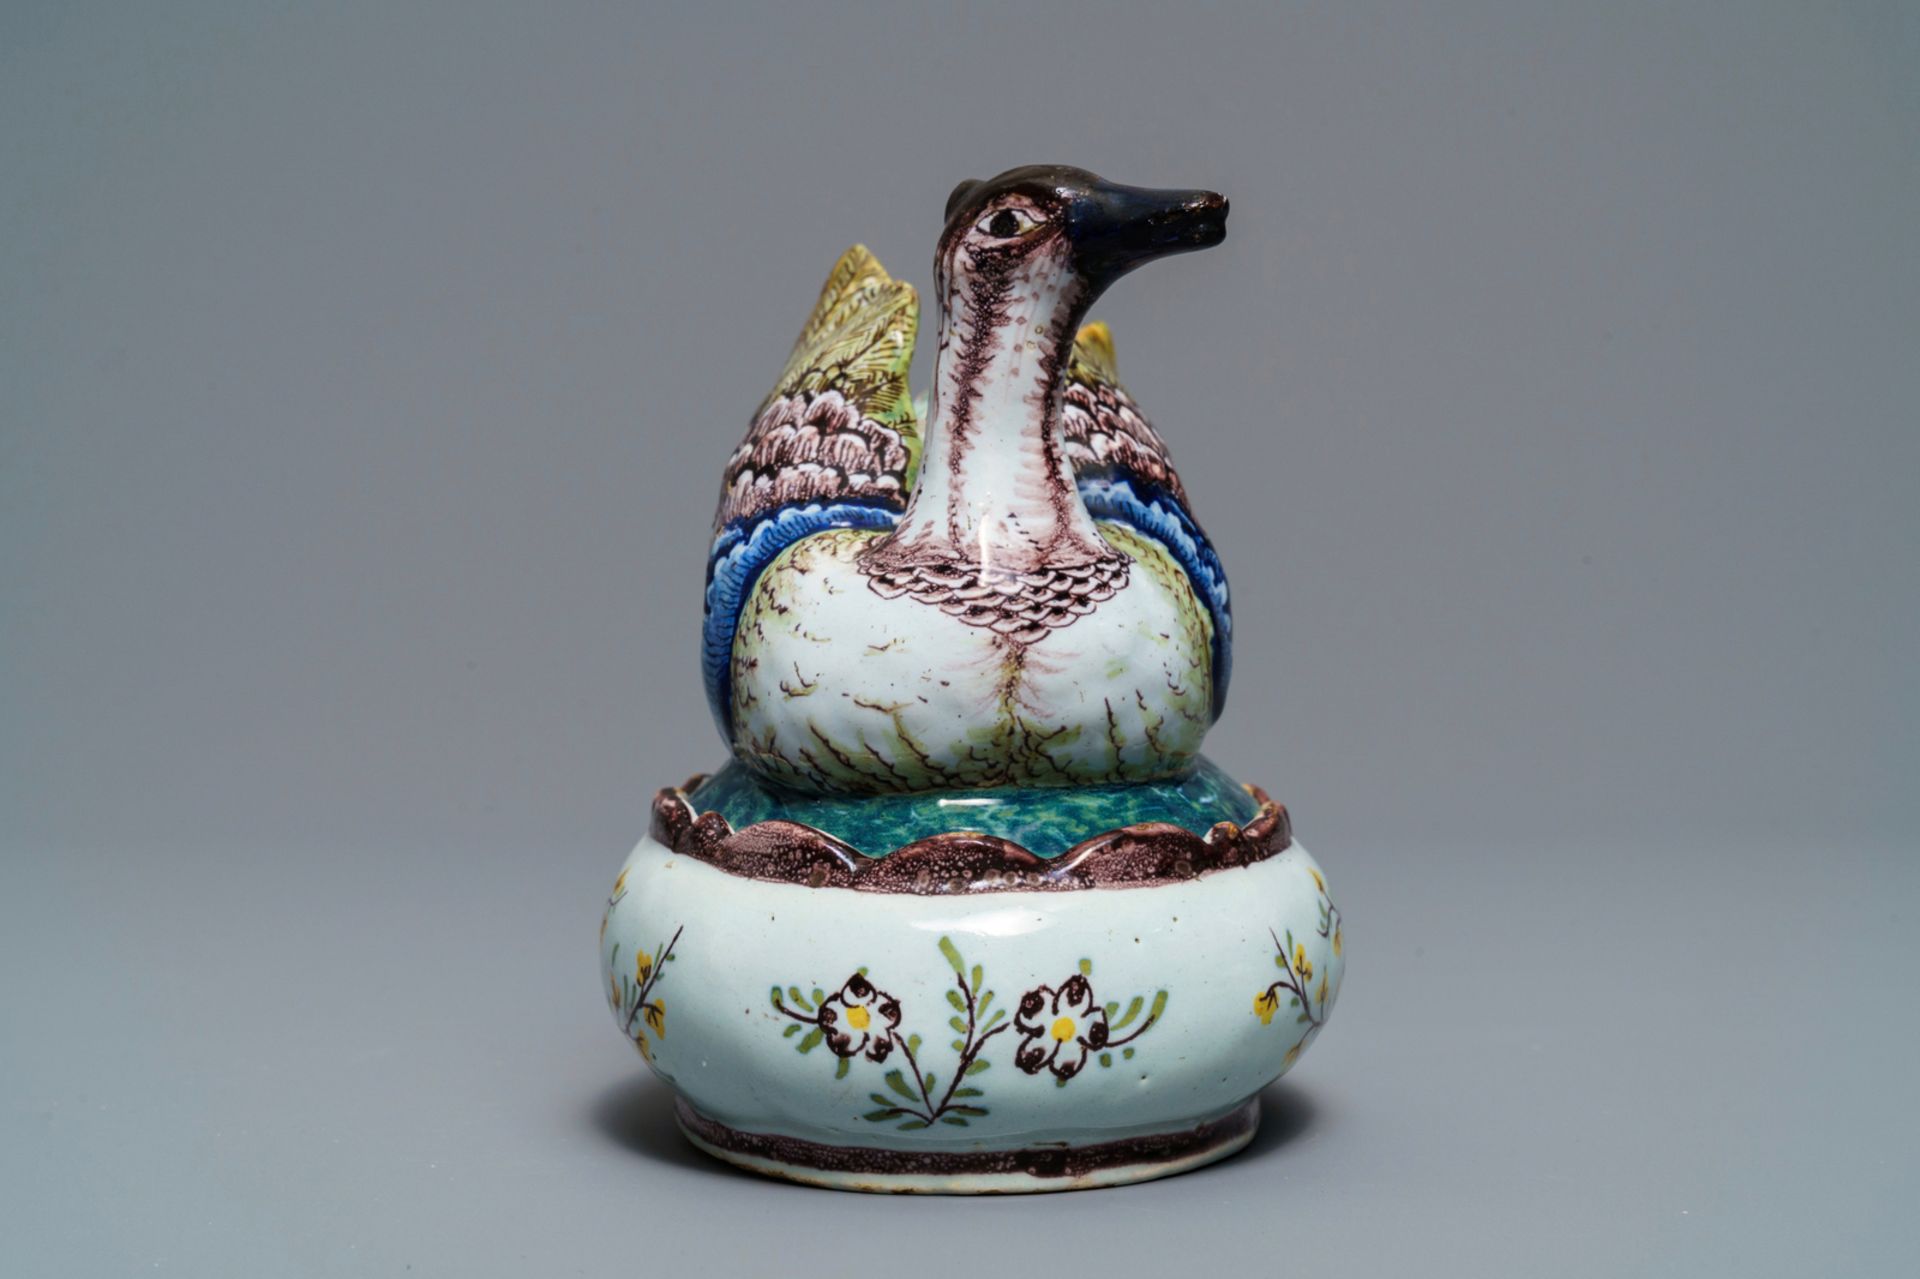 A polychrome Dutch Delft 'plover' butter tub and cover, 18th C. - Image 4 of 7